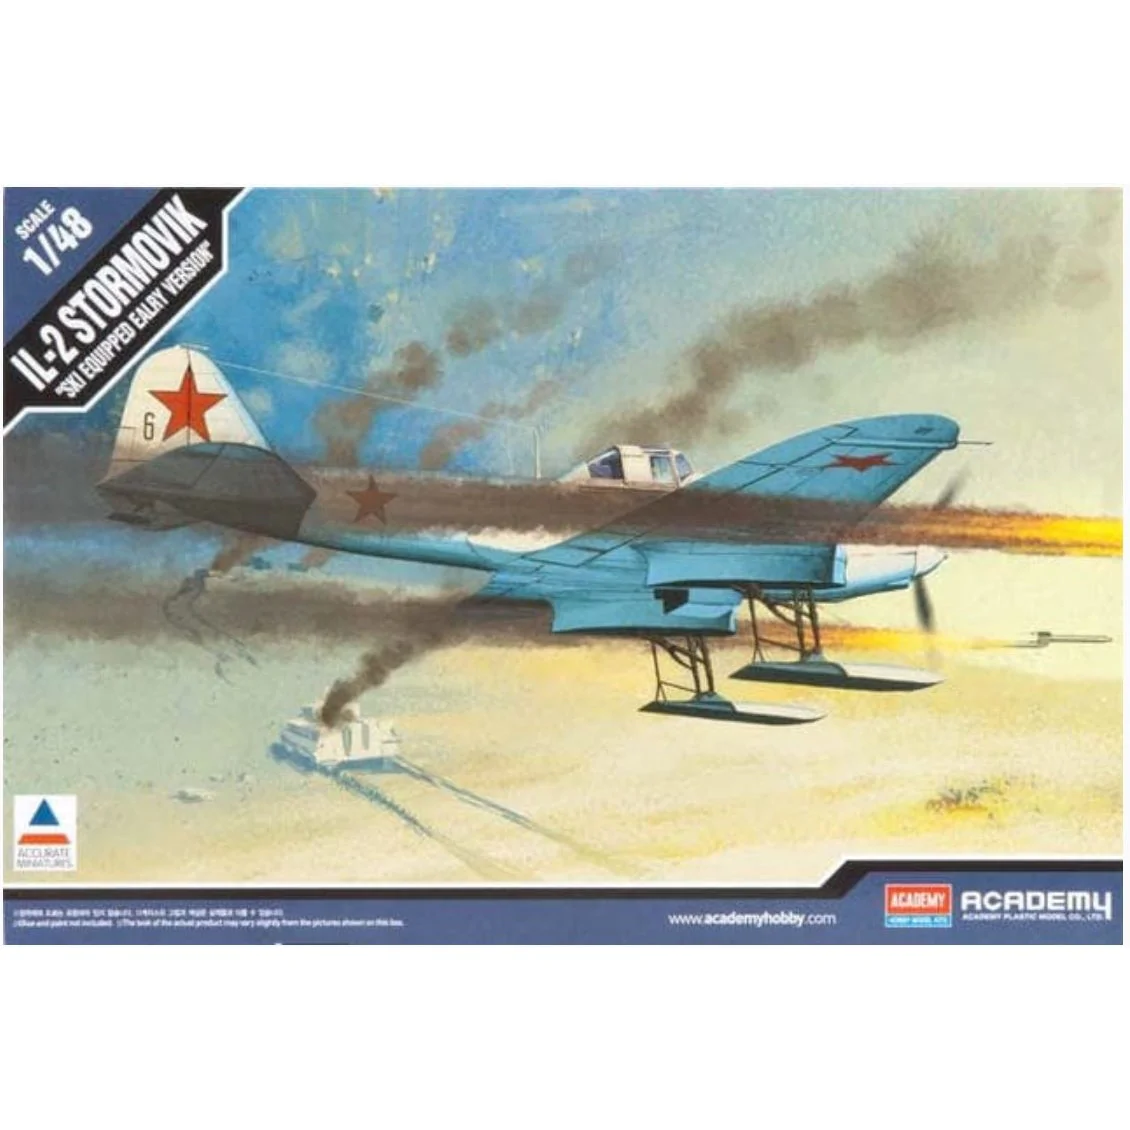 ACADEMY 12286 1/48 IL-2 Stormovik "Ski Equipped Ealry Version"